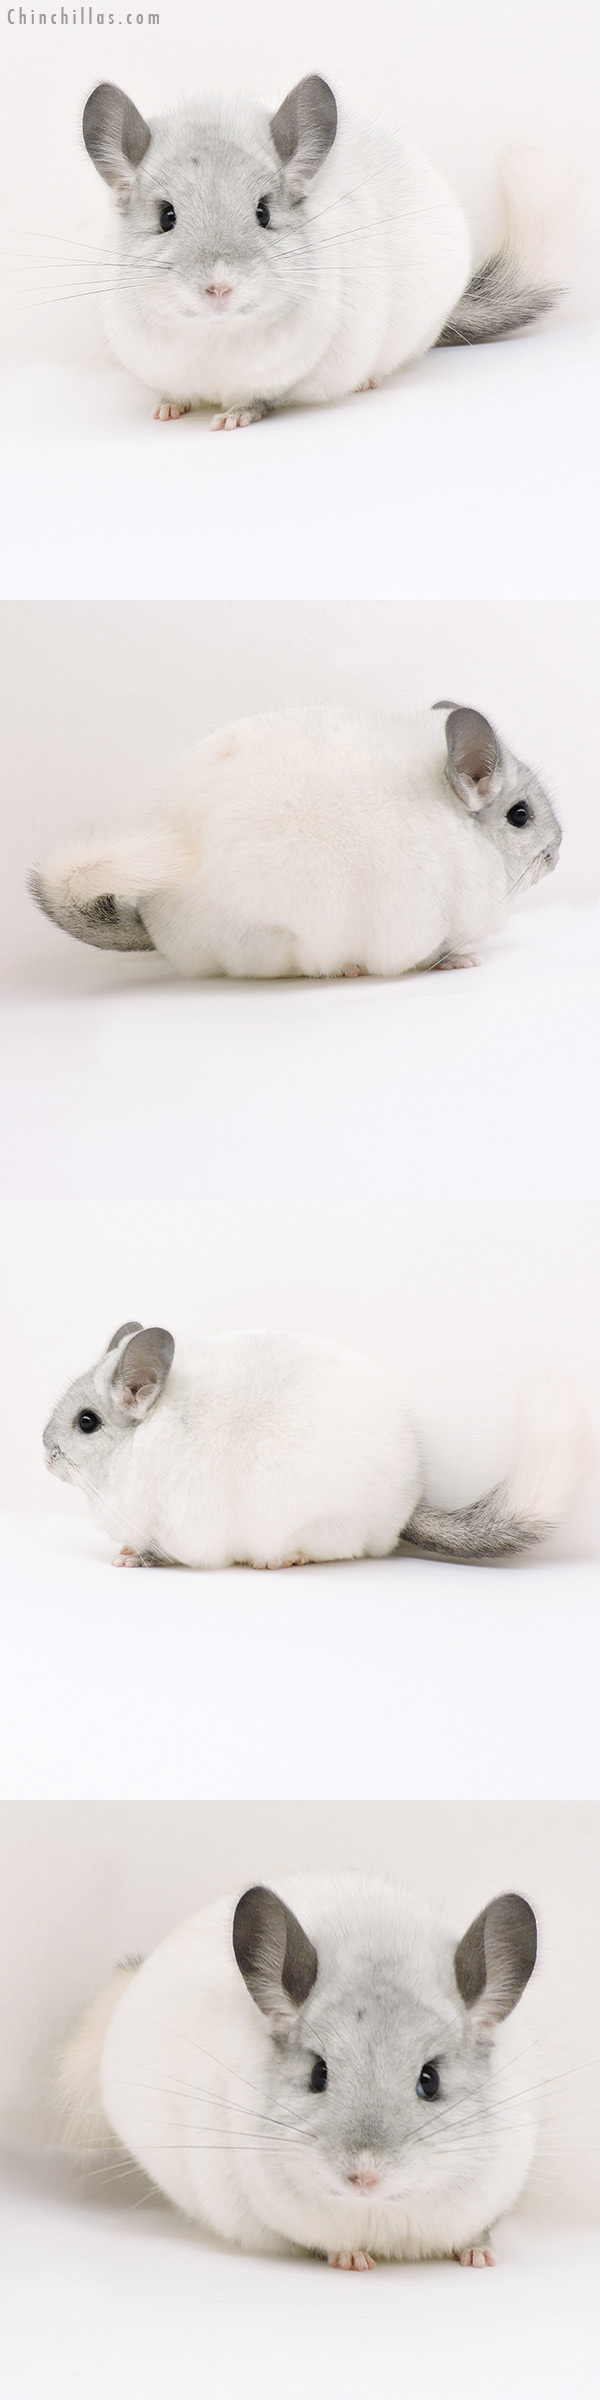 Chinchilla or related item offered for sale or export on Chinchillas.com - 18154 Exceptional Blocky Premium Production Quality White Female Chinchilla